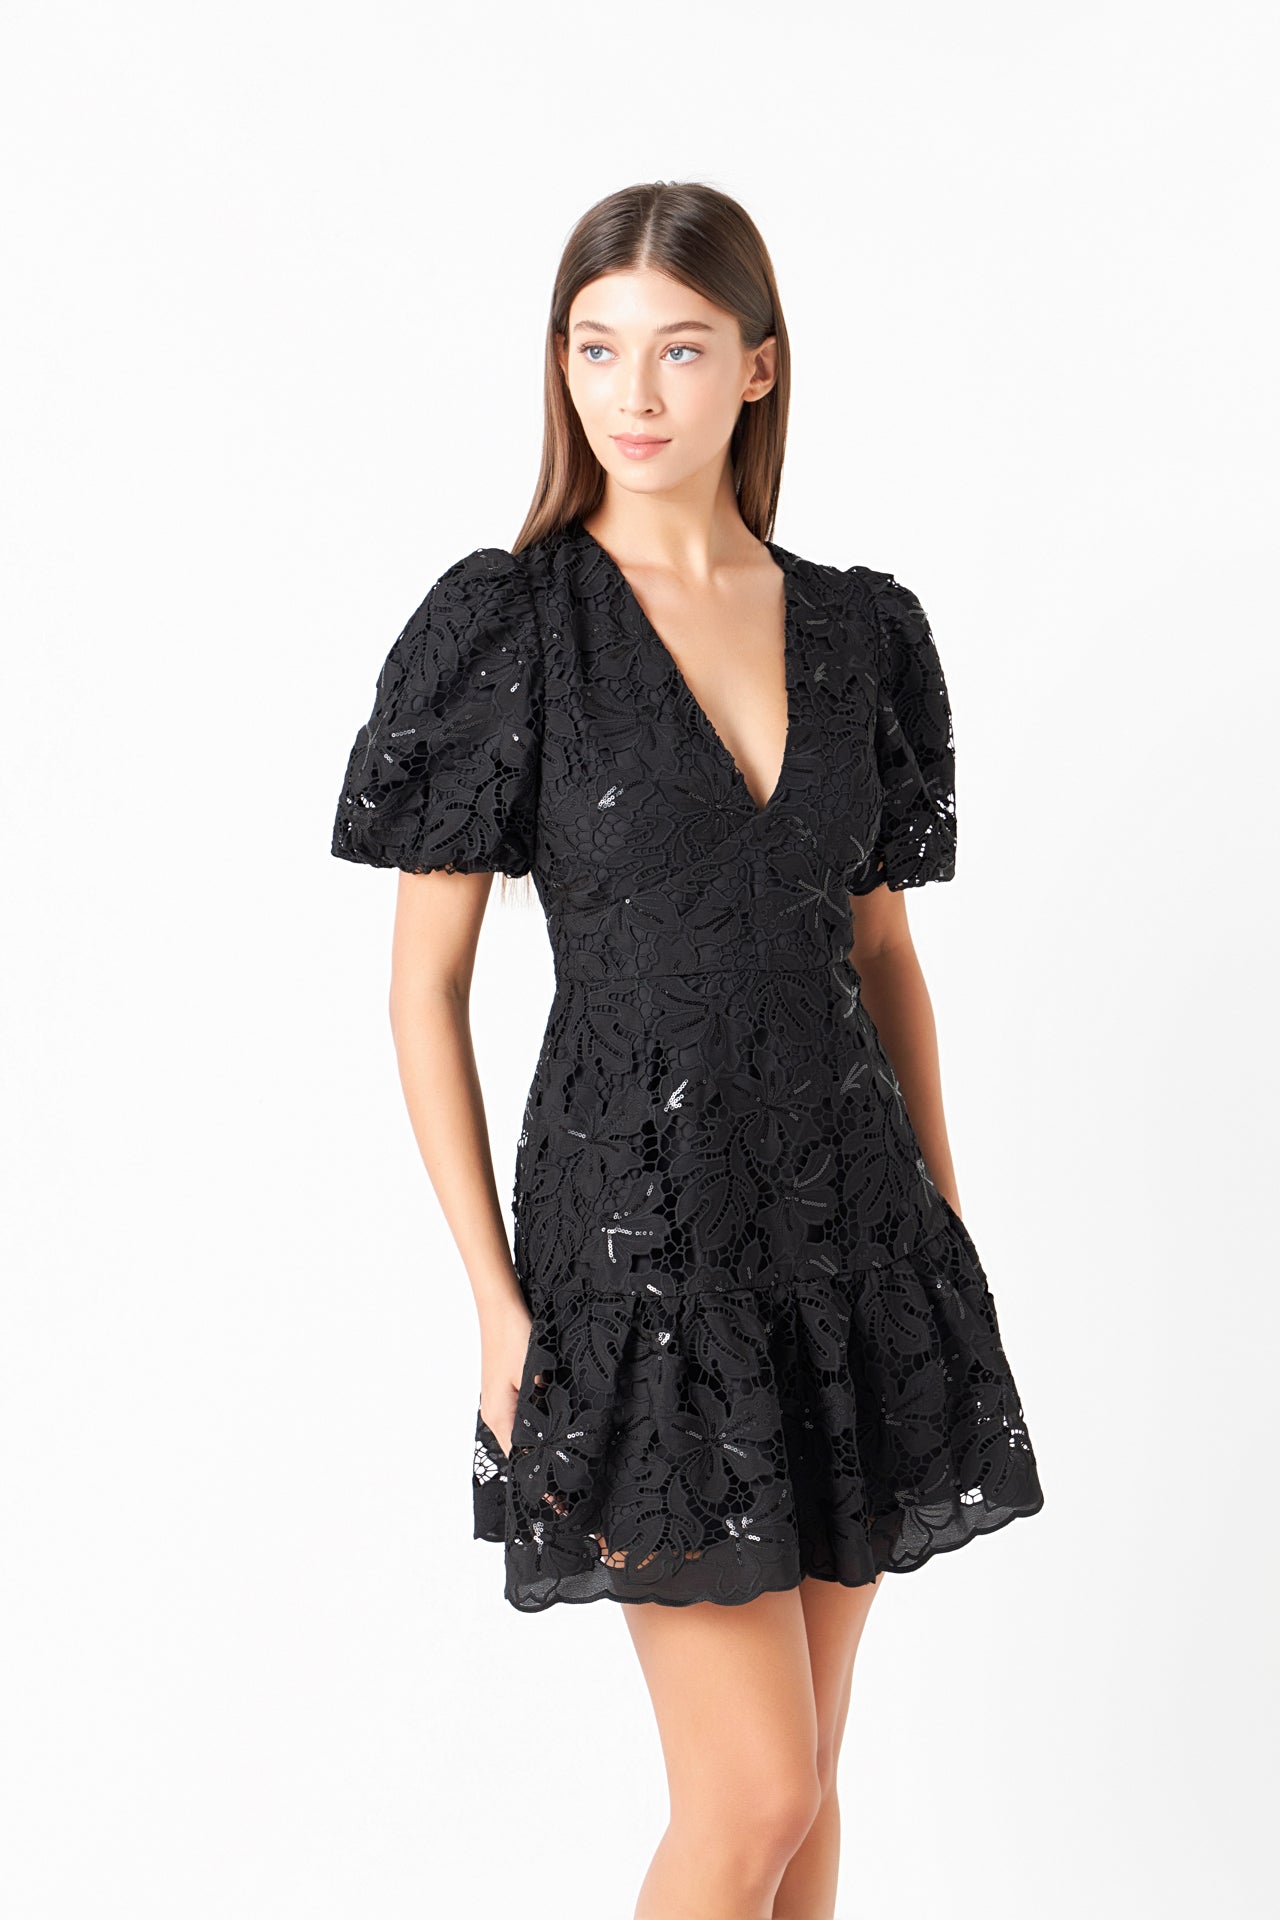 ENDLESS ROSE - Sequins Lace Mini Dress - DRESSES available at Objectrare